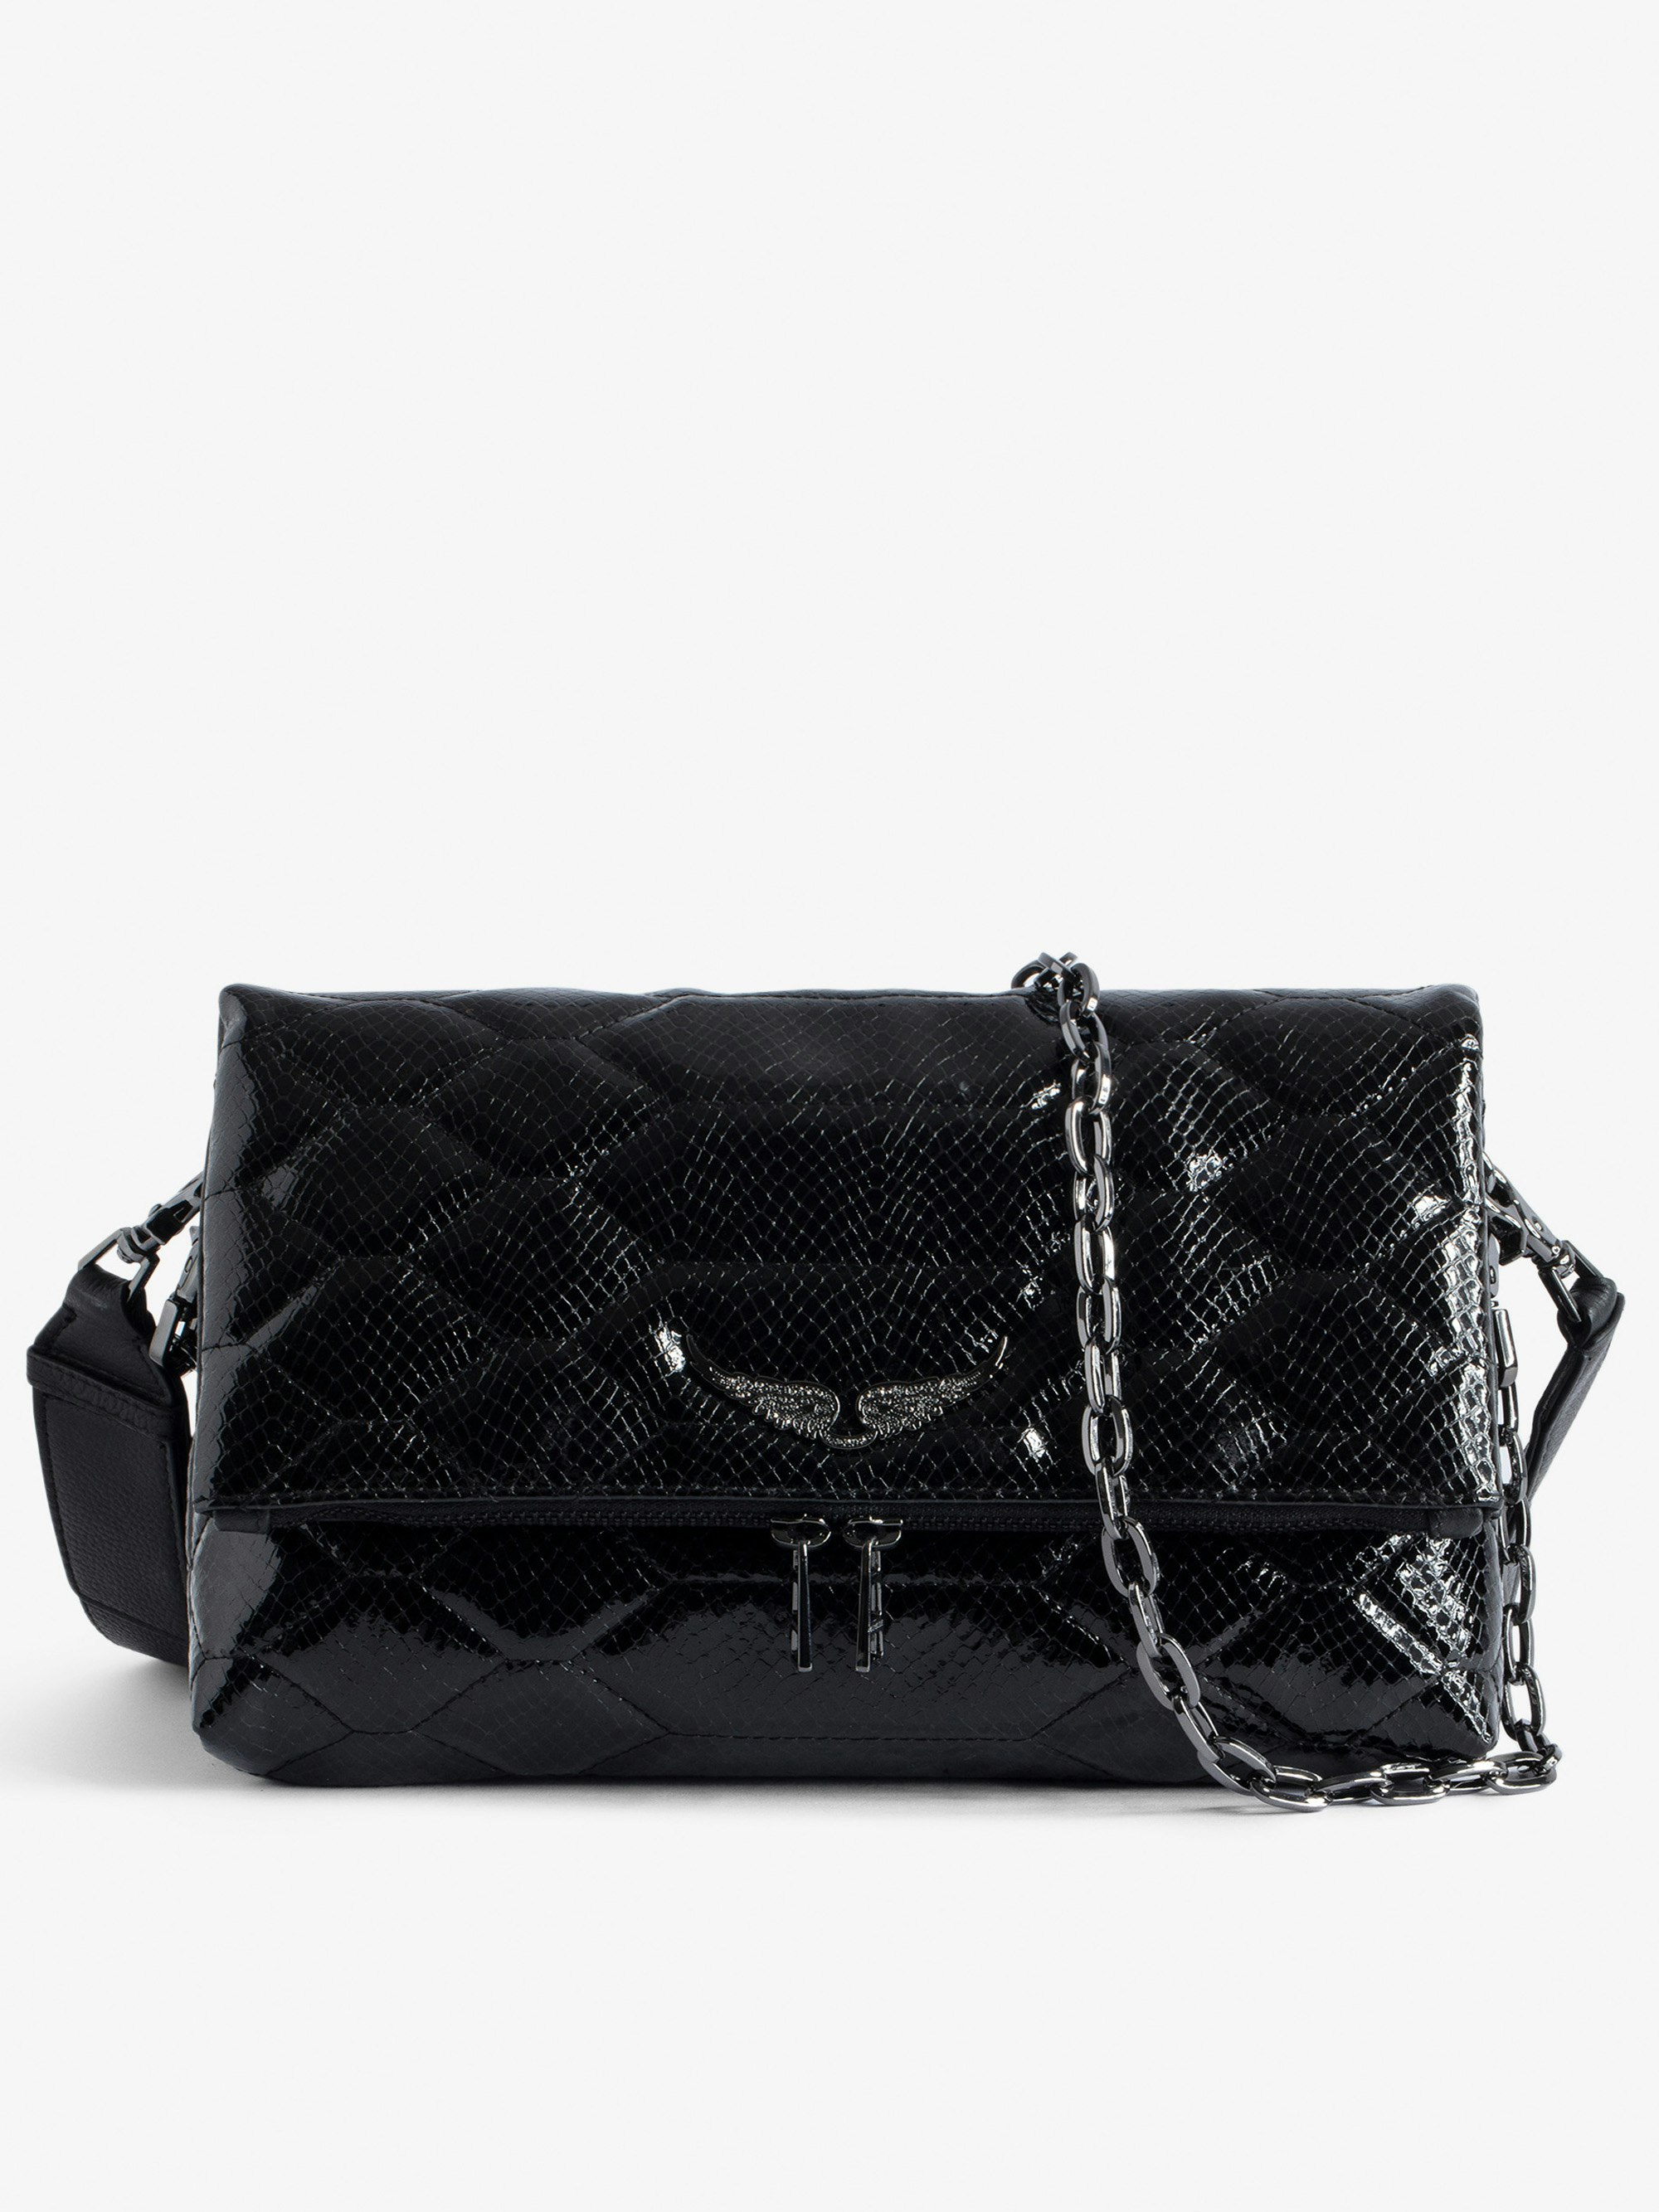 Rocky Glossy Wild Quilted Bag - Women’s black quilted python-effect patent leather bag with shoulder strap and chain.